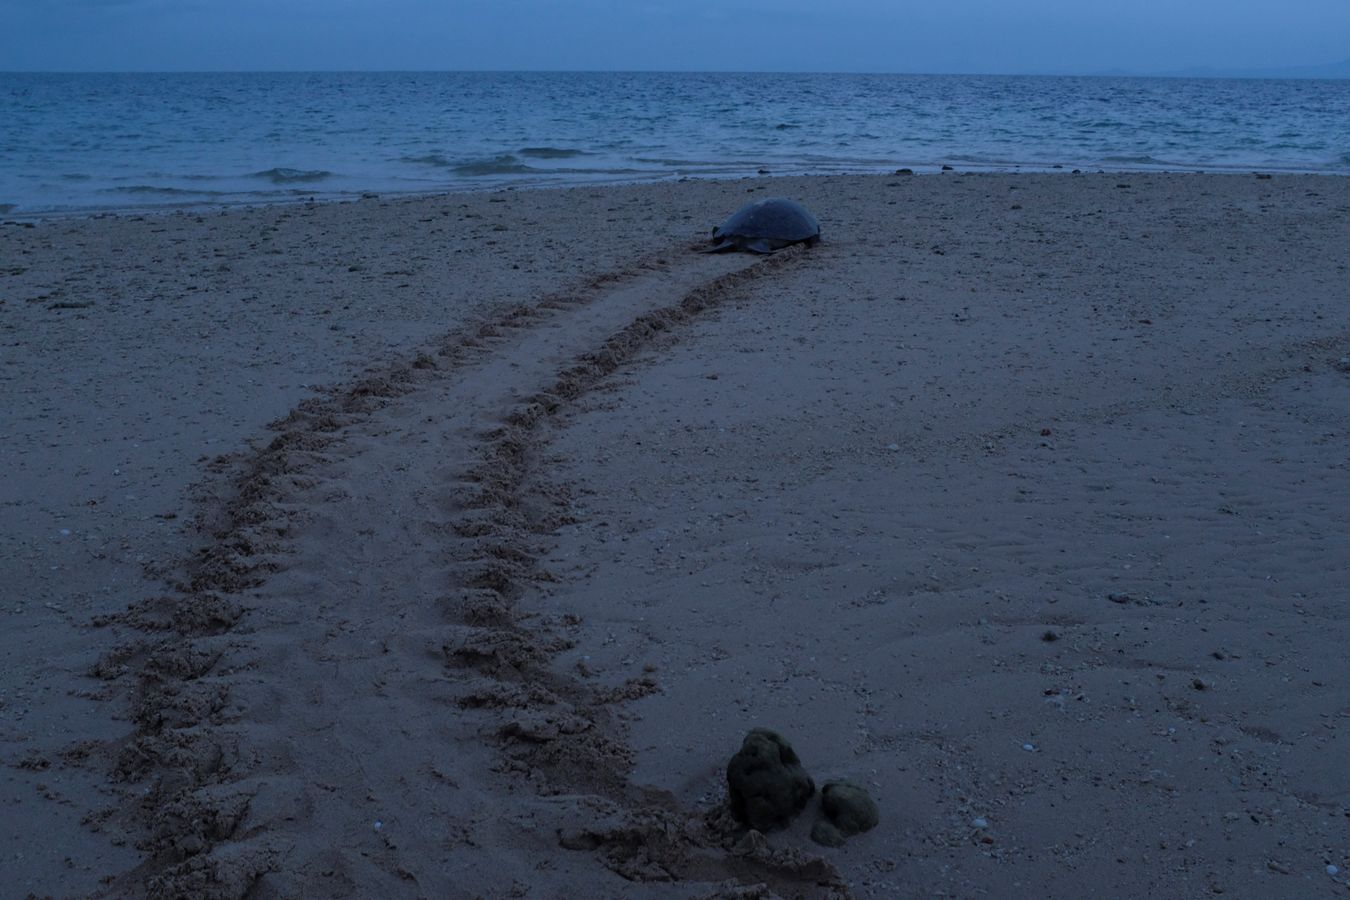 Early in the morning a green turtle returns to the ocean after laying its eggs.